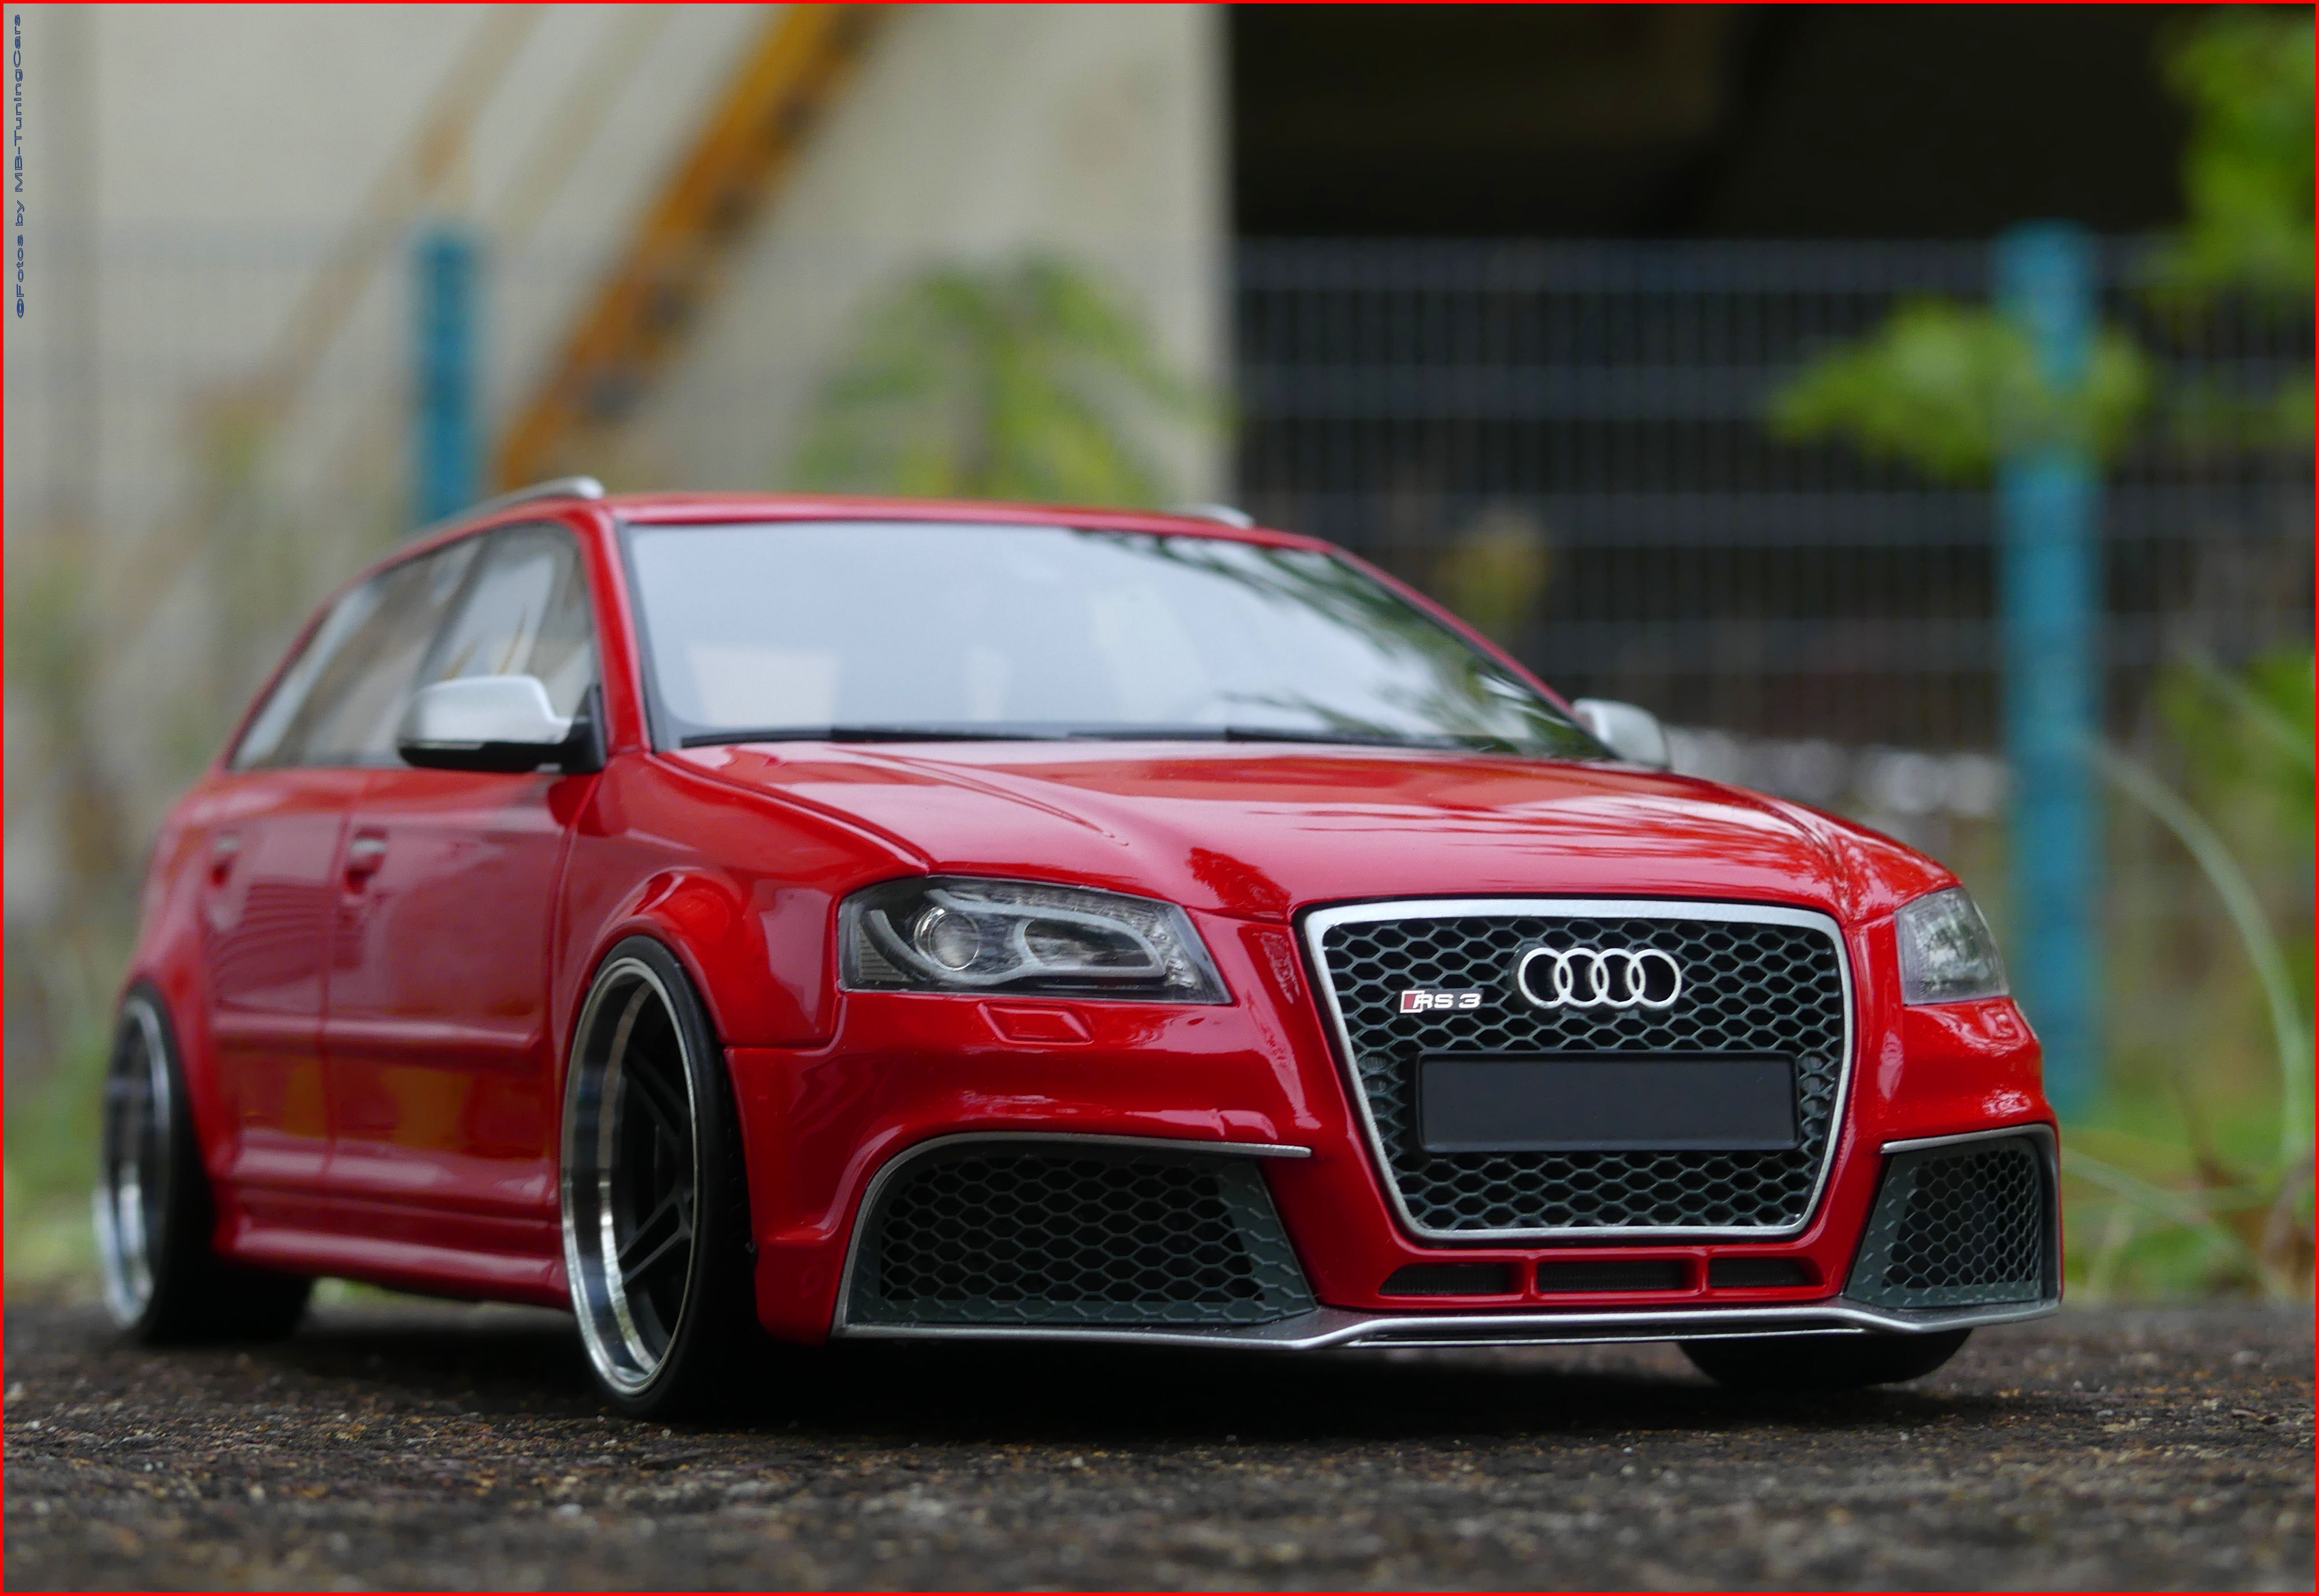 MB-TuningCars - 1:18 Audi A3 RS3 8P Misano Red Edition + Concave Alufelgen  inkl. OVP